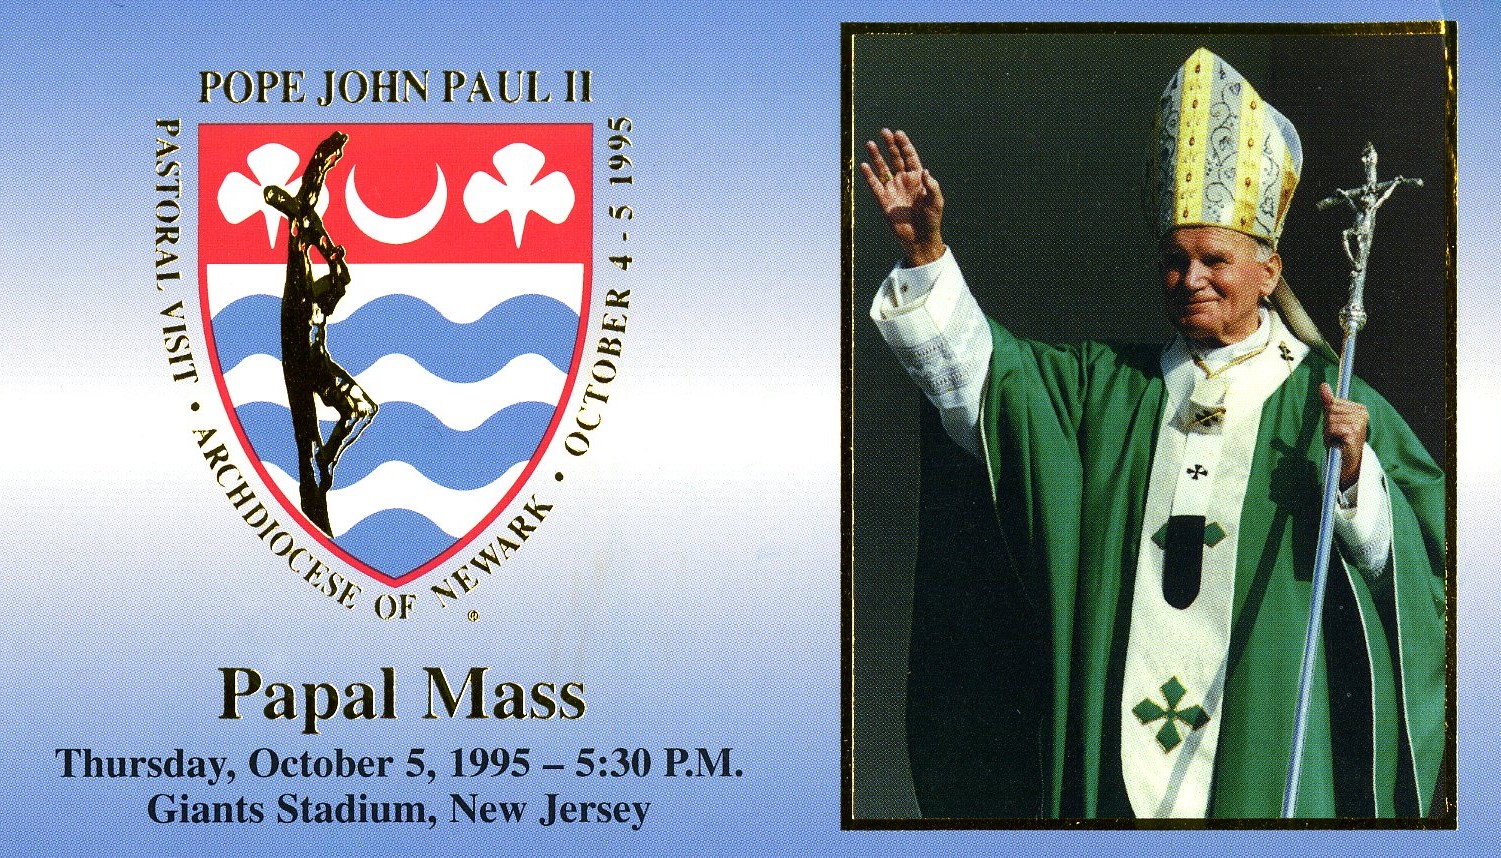 Image of card for Pope John Paul II's Papal Mass from October 5, 1995.